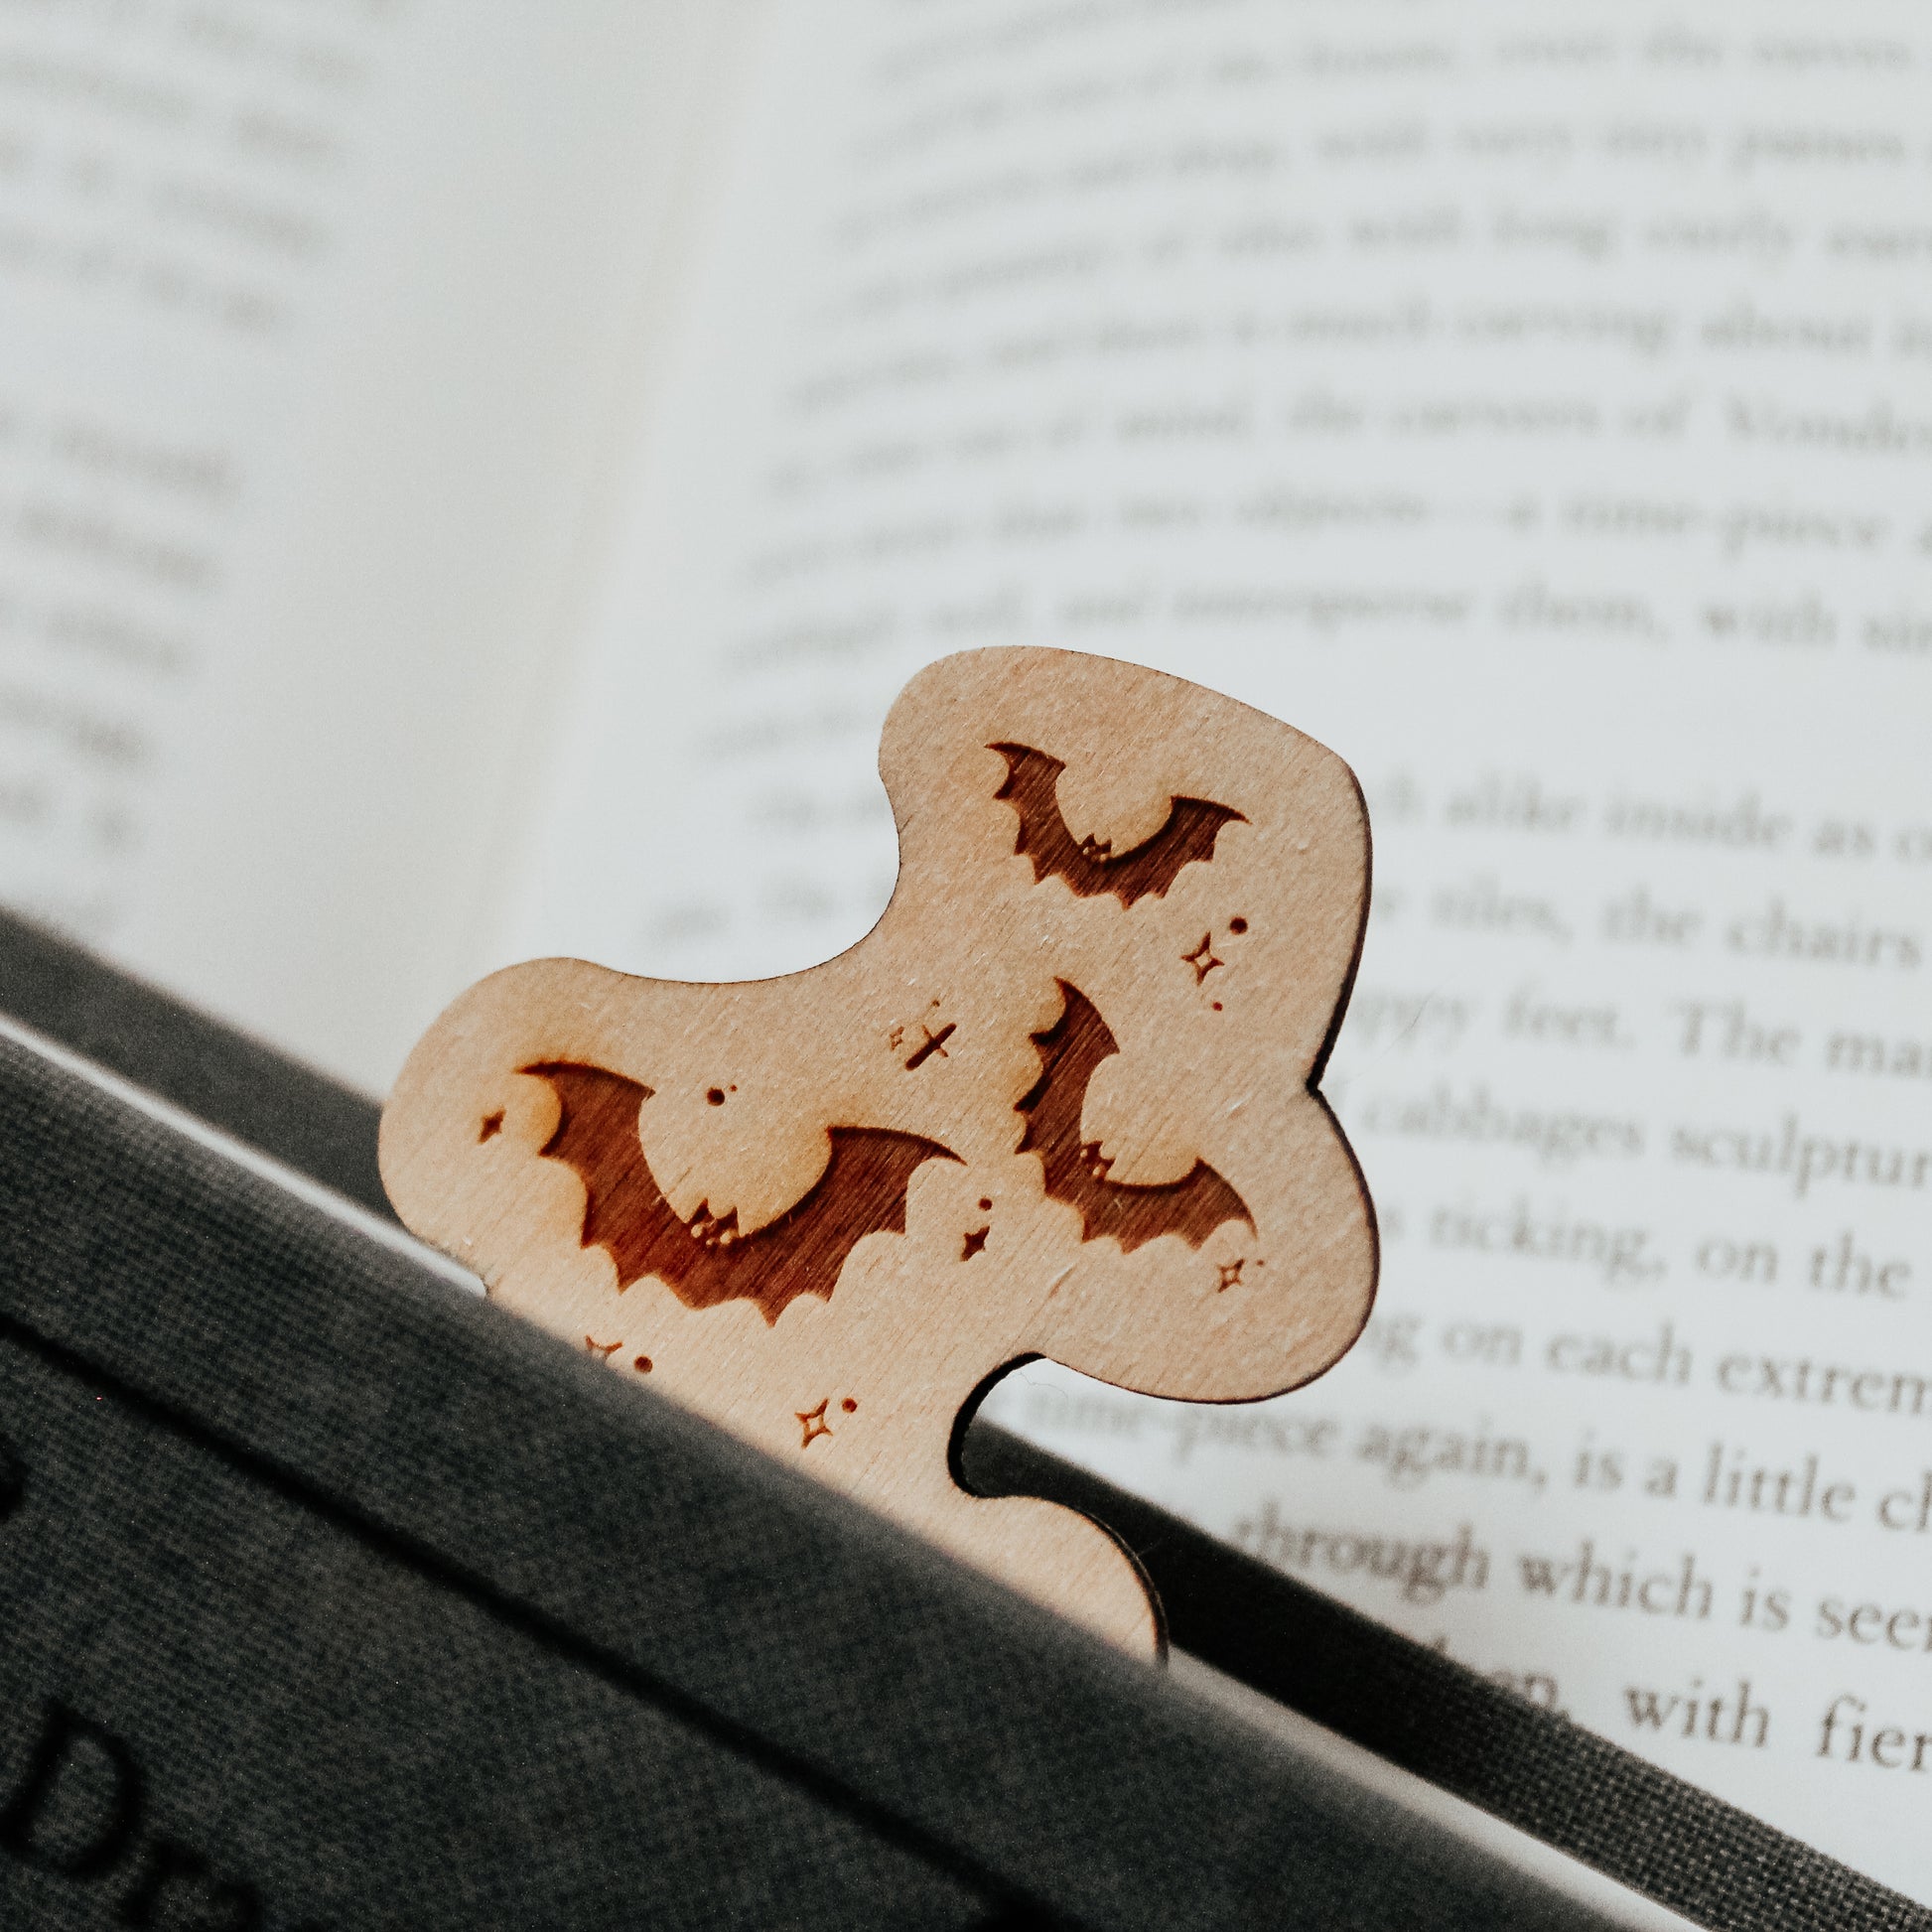 Image showing the bookmark how it appears coming out of a book with bats escaping your book